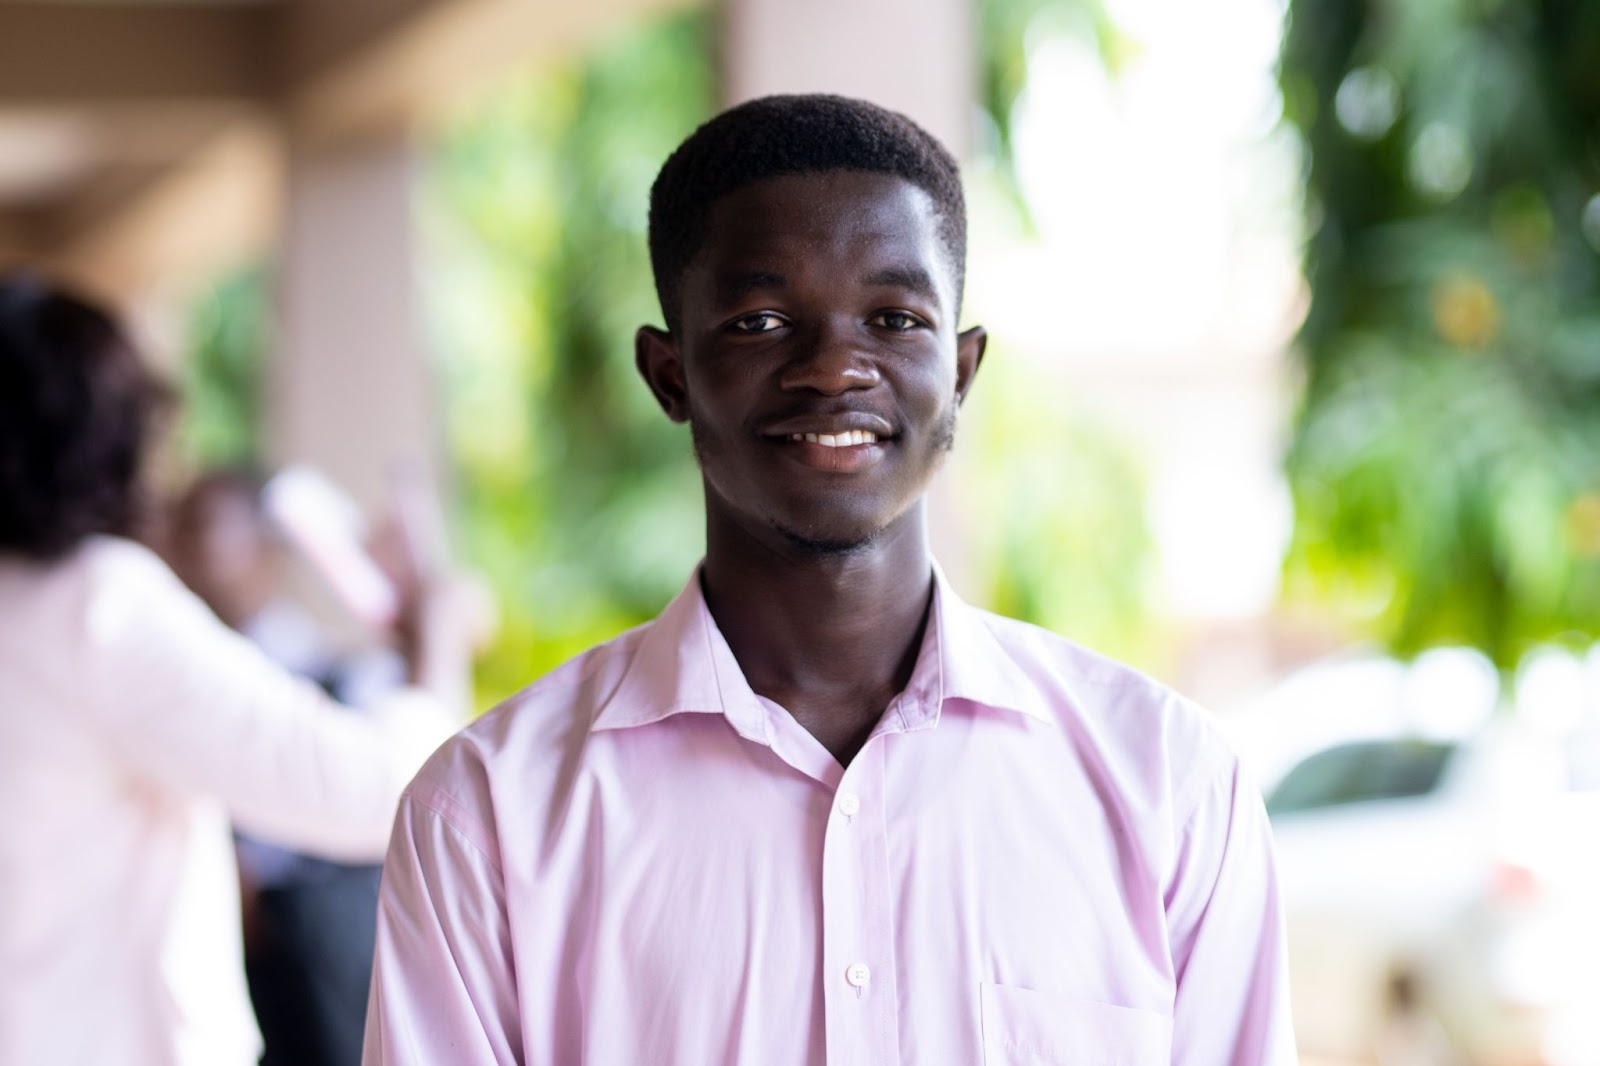 “UENR is Shaping My Life&#8221;: First-Year Student Shares Transformative Experience, University of Energy and Natural Resources - Sunyani